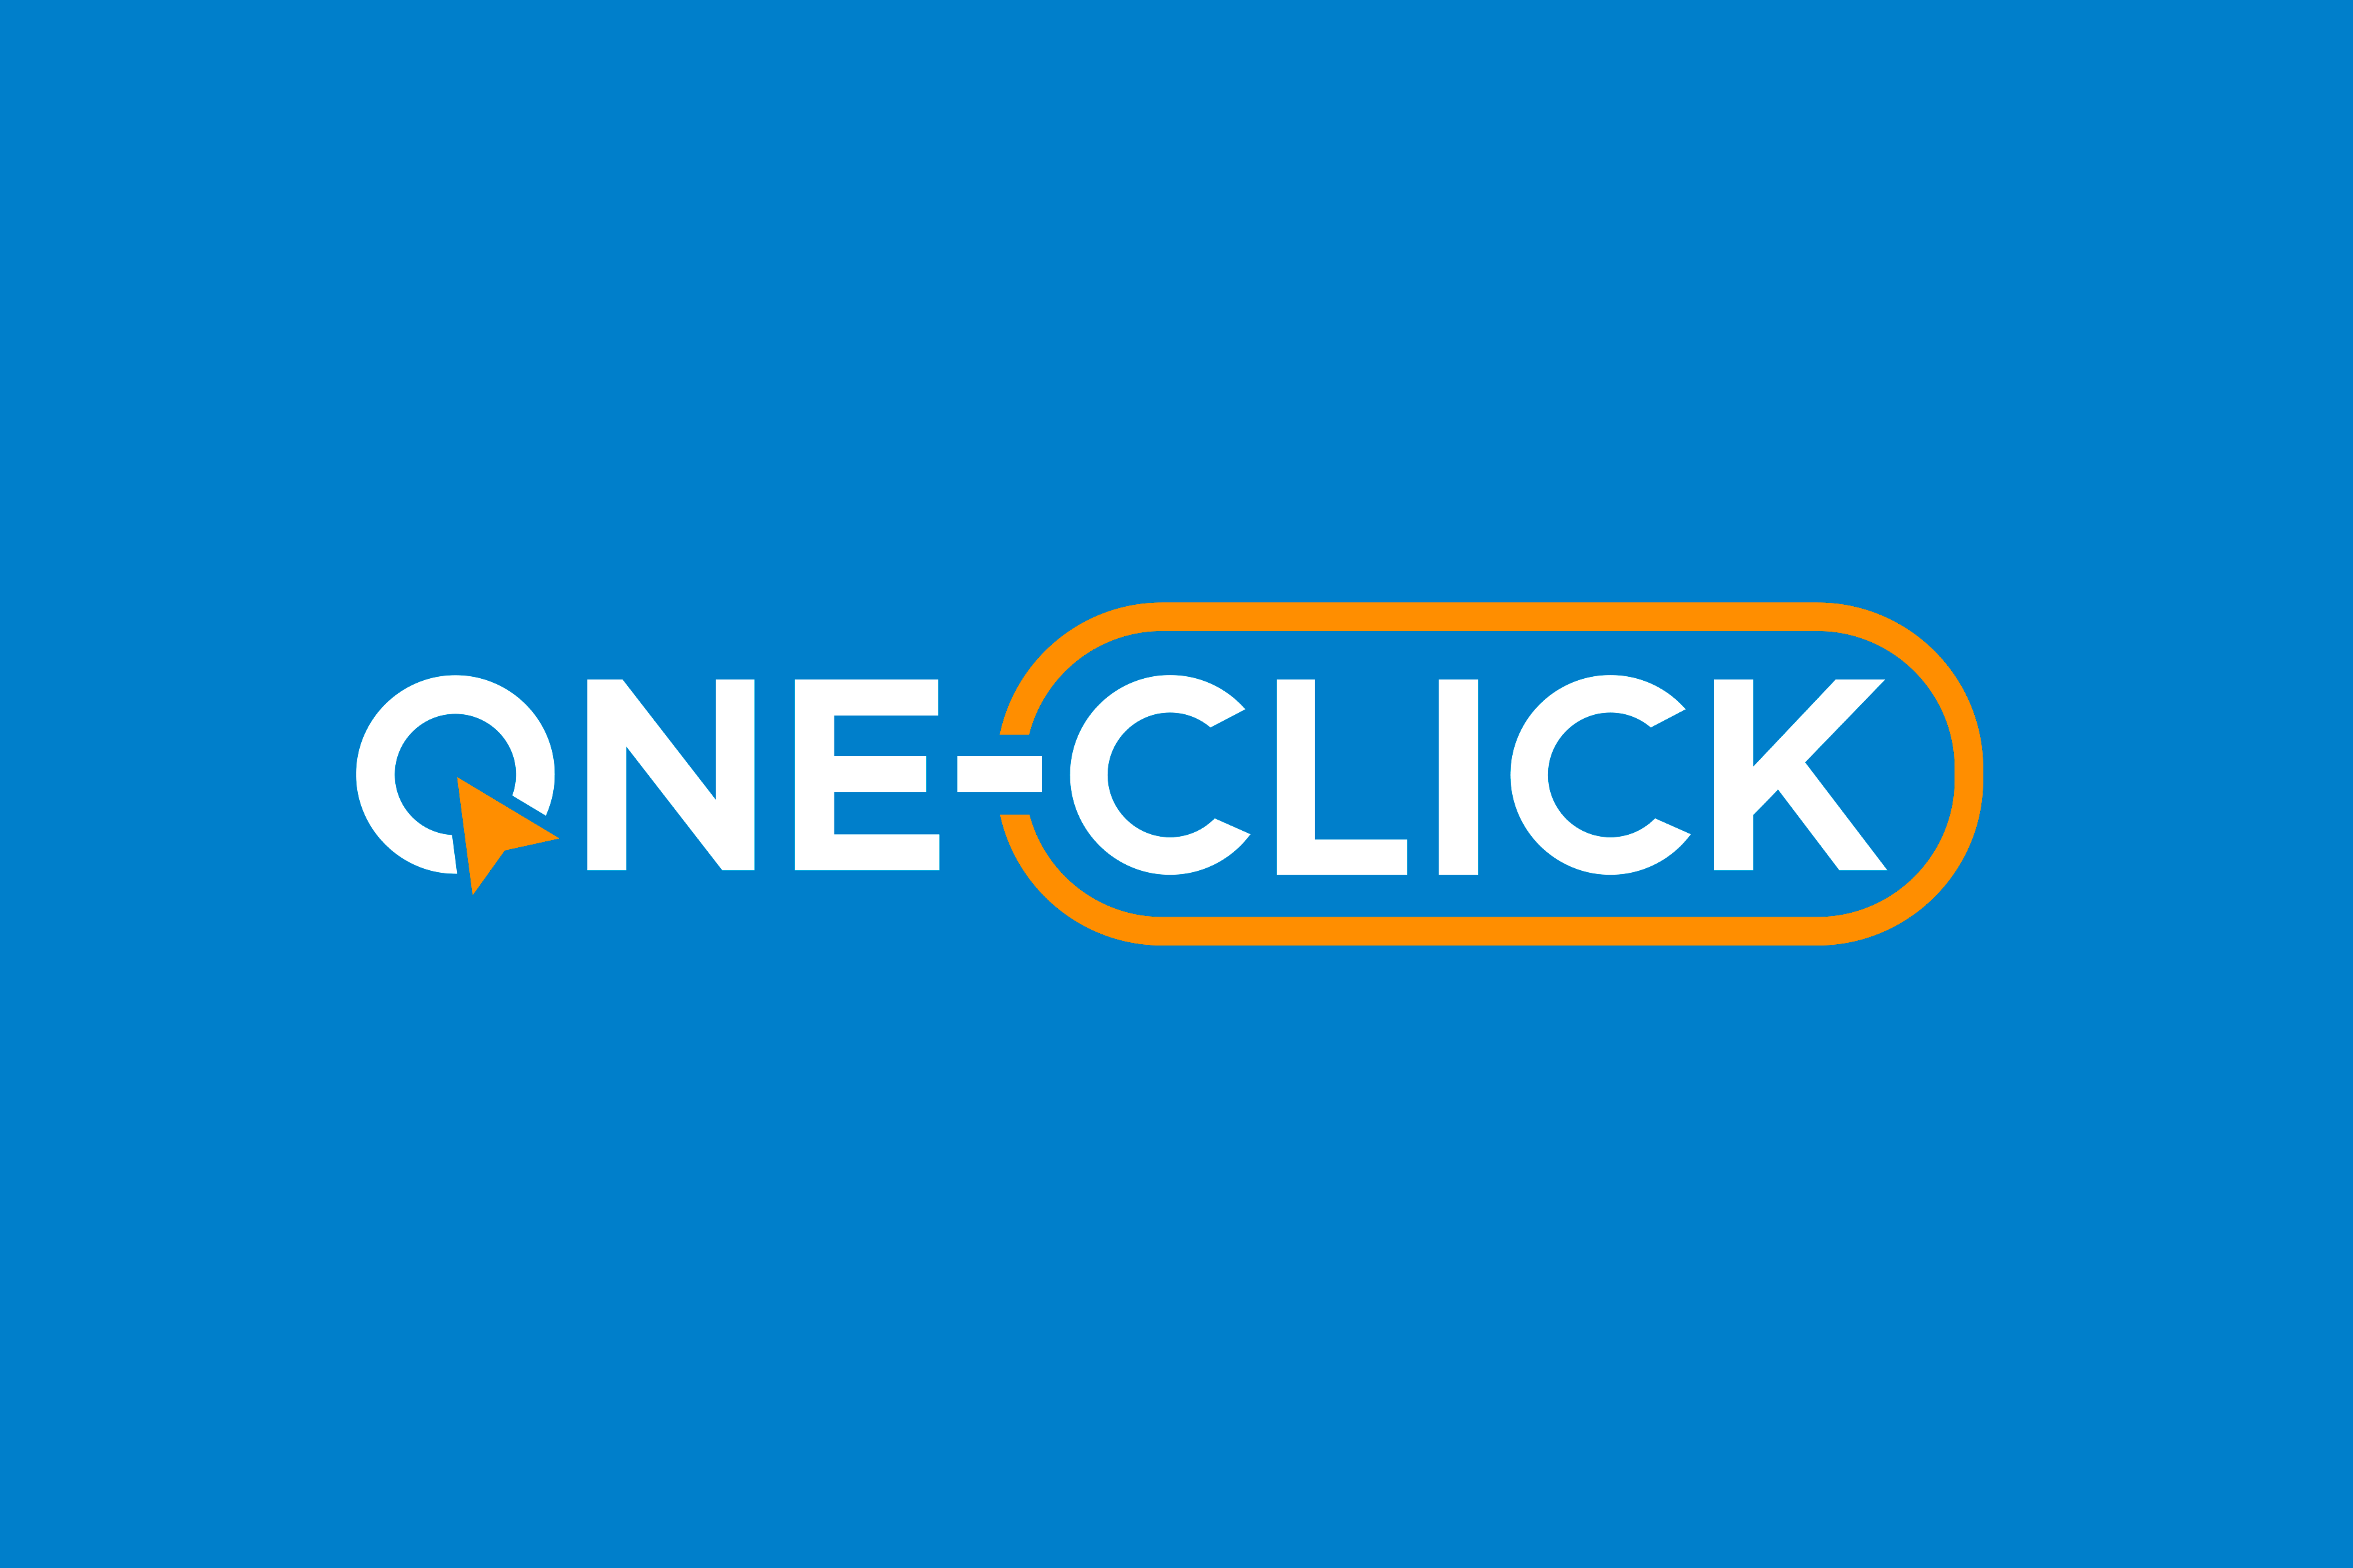 ONE-CLICK